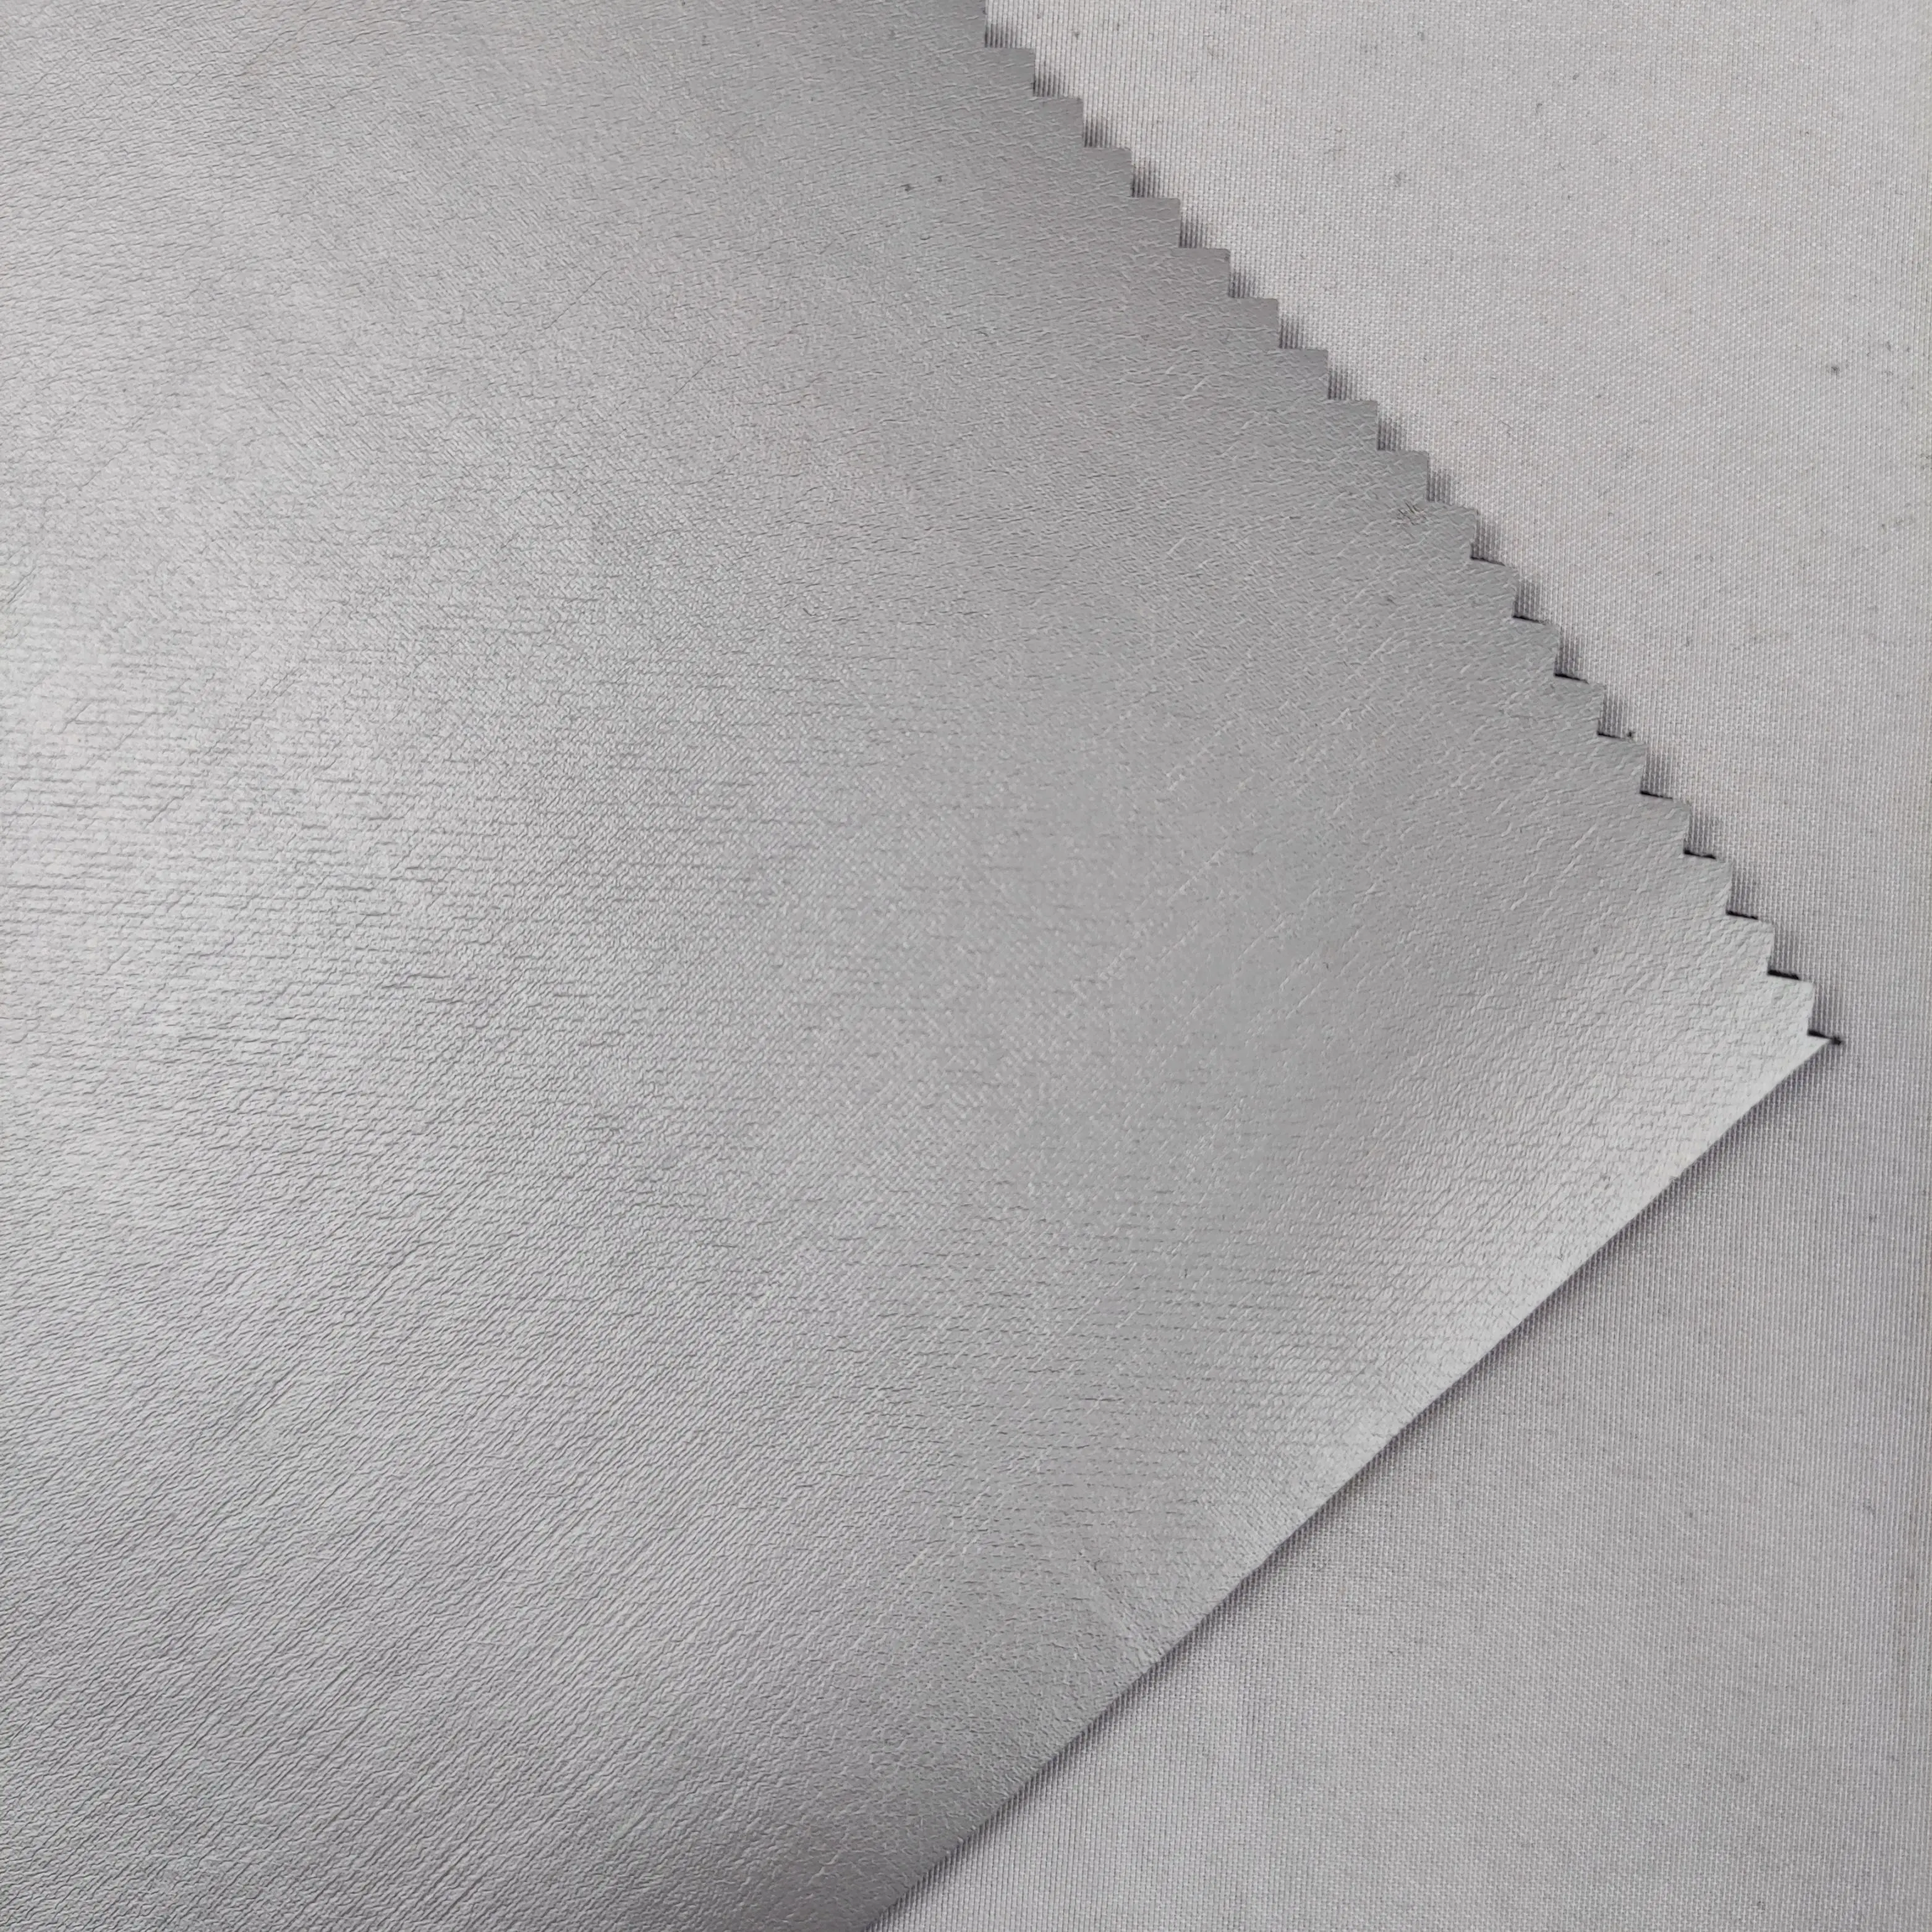 UOO Factory 3mm Polyester VS Towel Fabric Terry Fabric with Shiny Silver Coating SBR Neoprene Fabric for Slimming Pants Belt